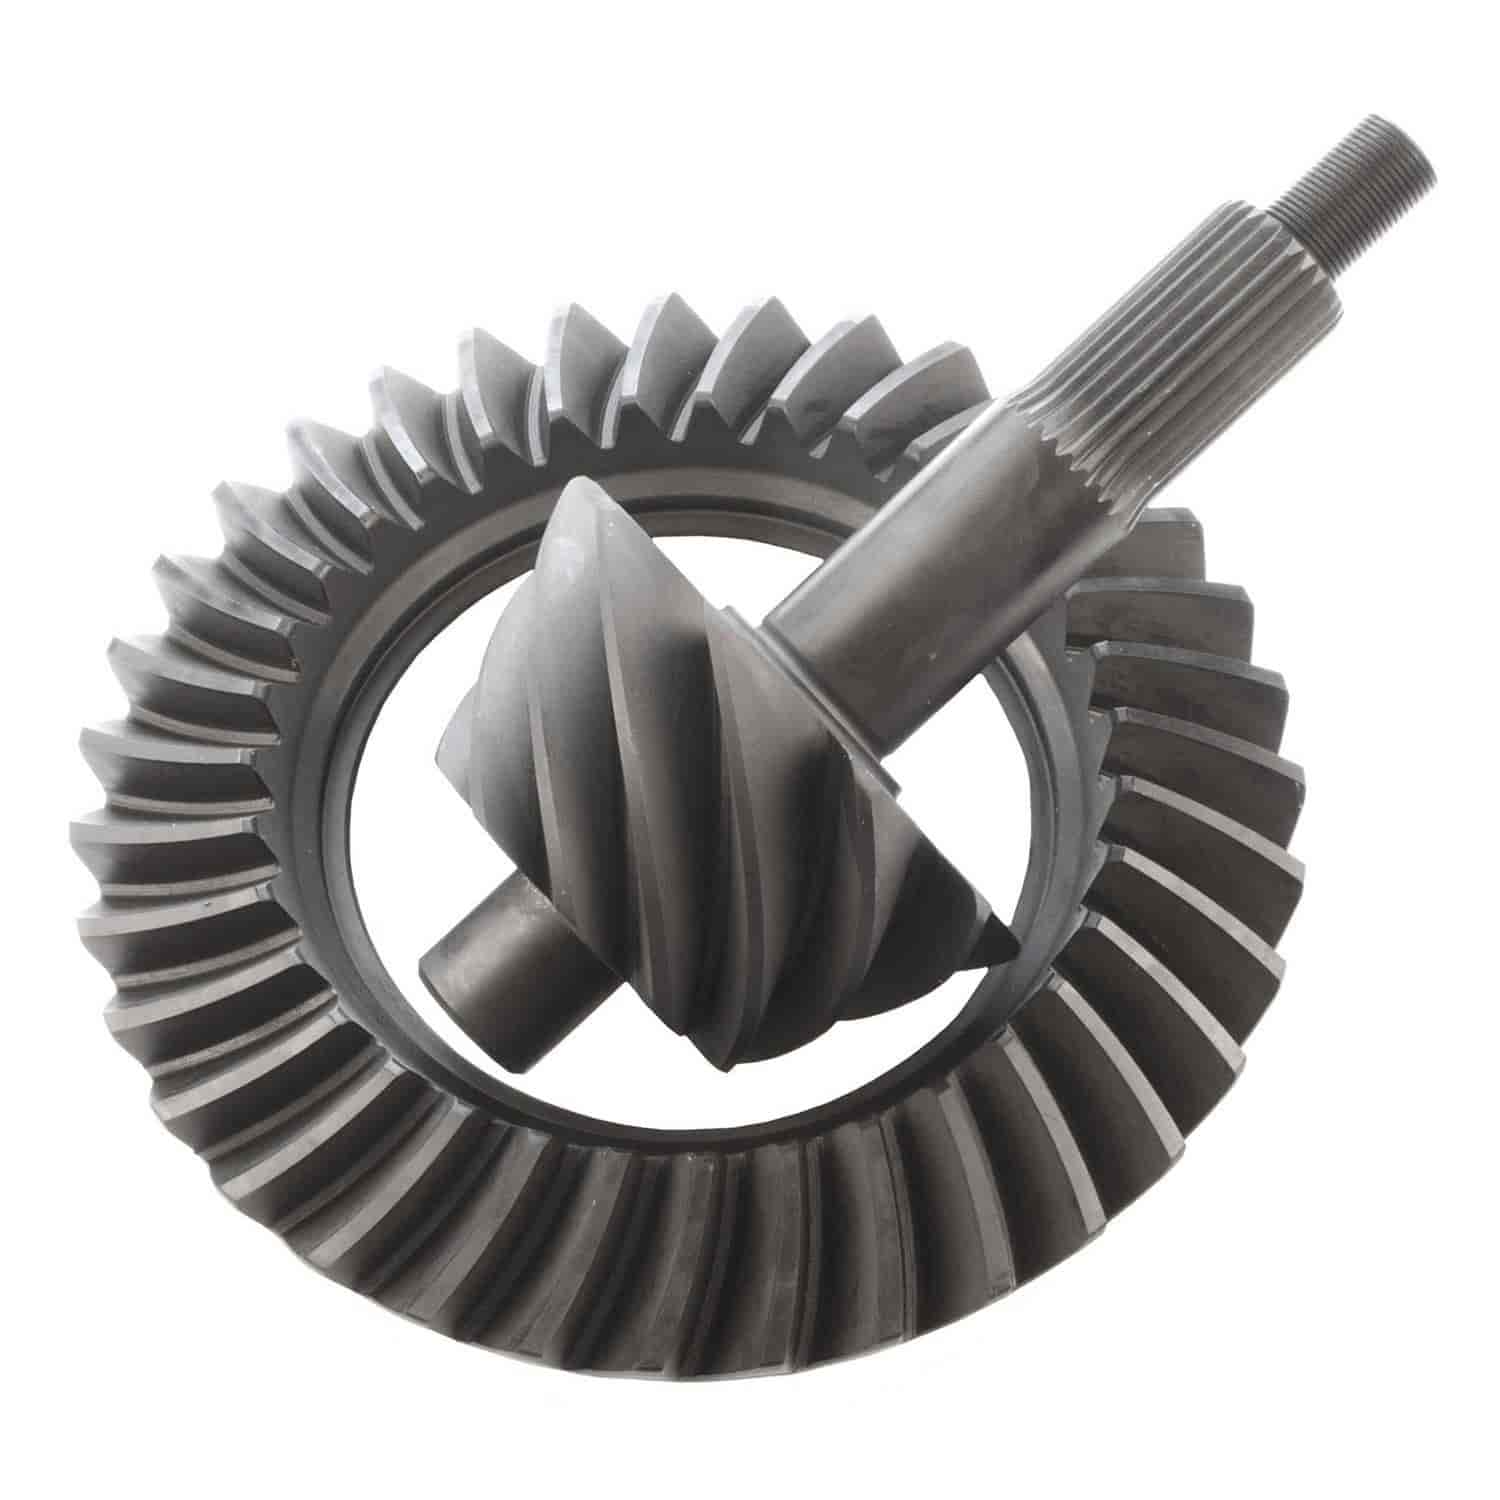 Excel Ring & Pinion Gear Set Ford 9" Ratio: 3.55